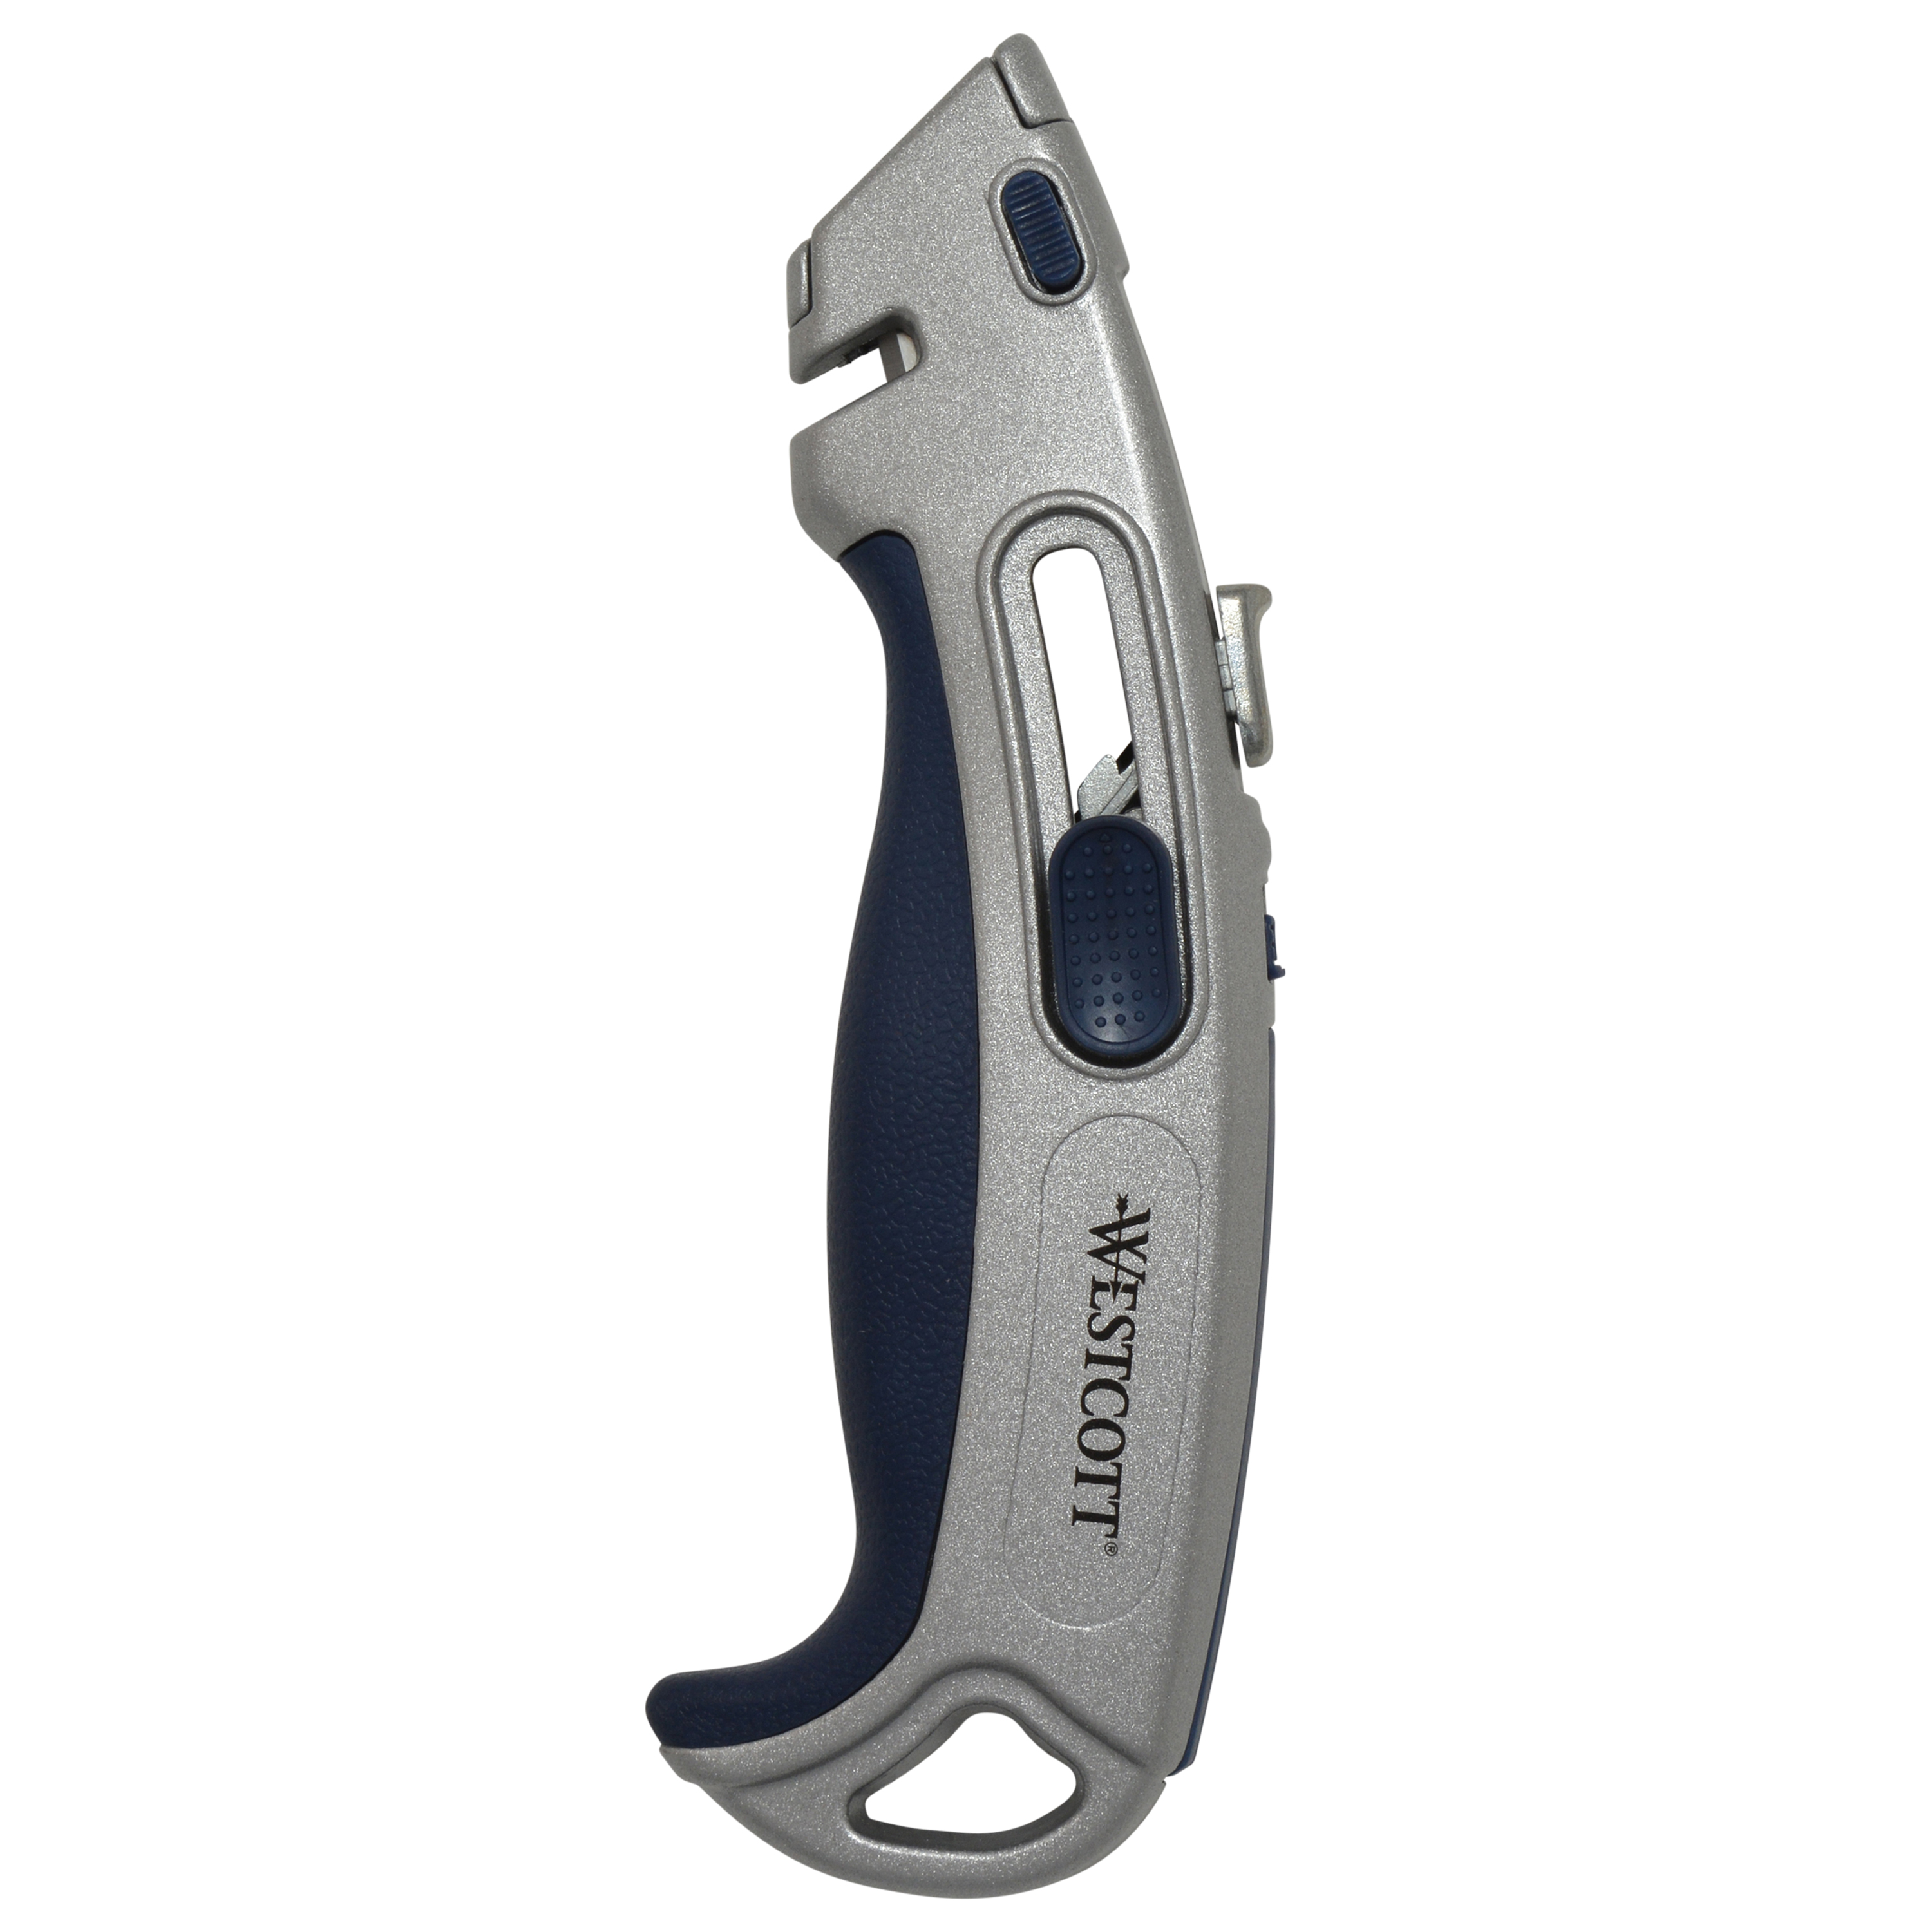 Westcott Heavy Duty Utility Cutter, Silver, 3 Blades, for Office, 8.86 inches, 1-Count - image 1 of 8